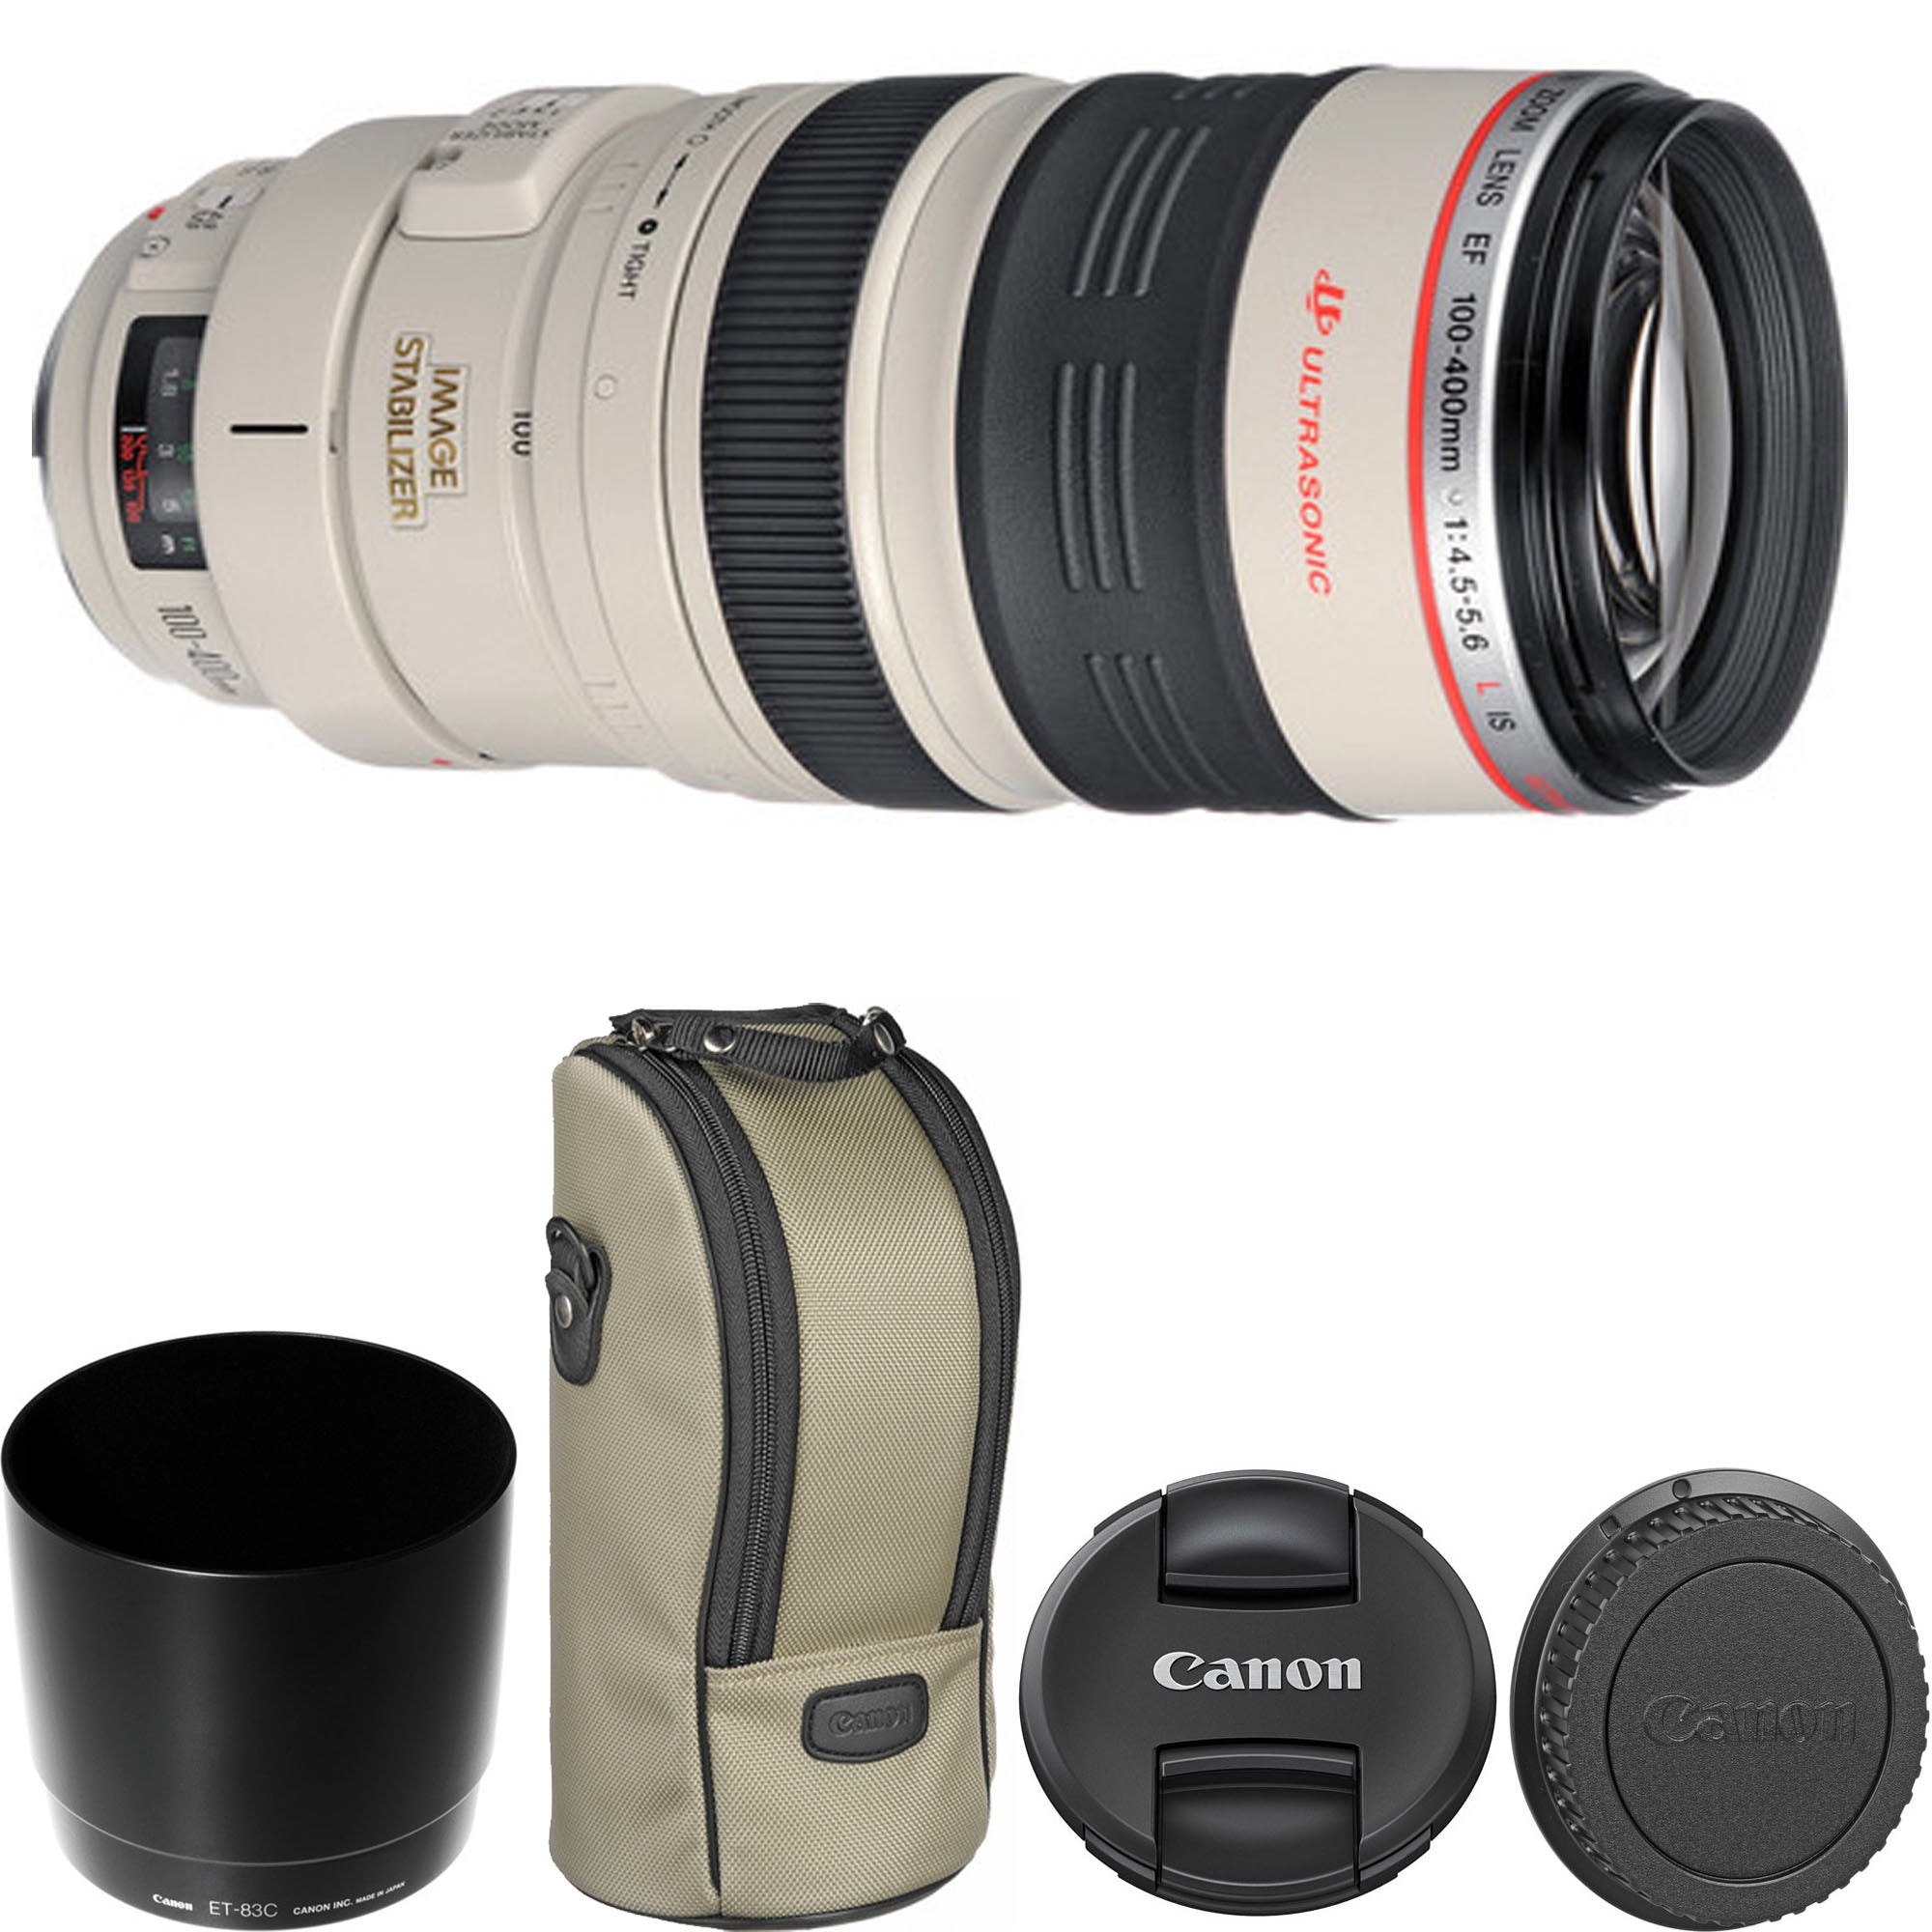 Canon EF 100-400mm f/4.5-5.6L IS USM Lens | NJ Accessory/Buy 